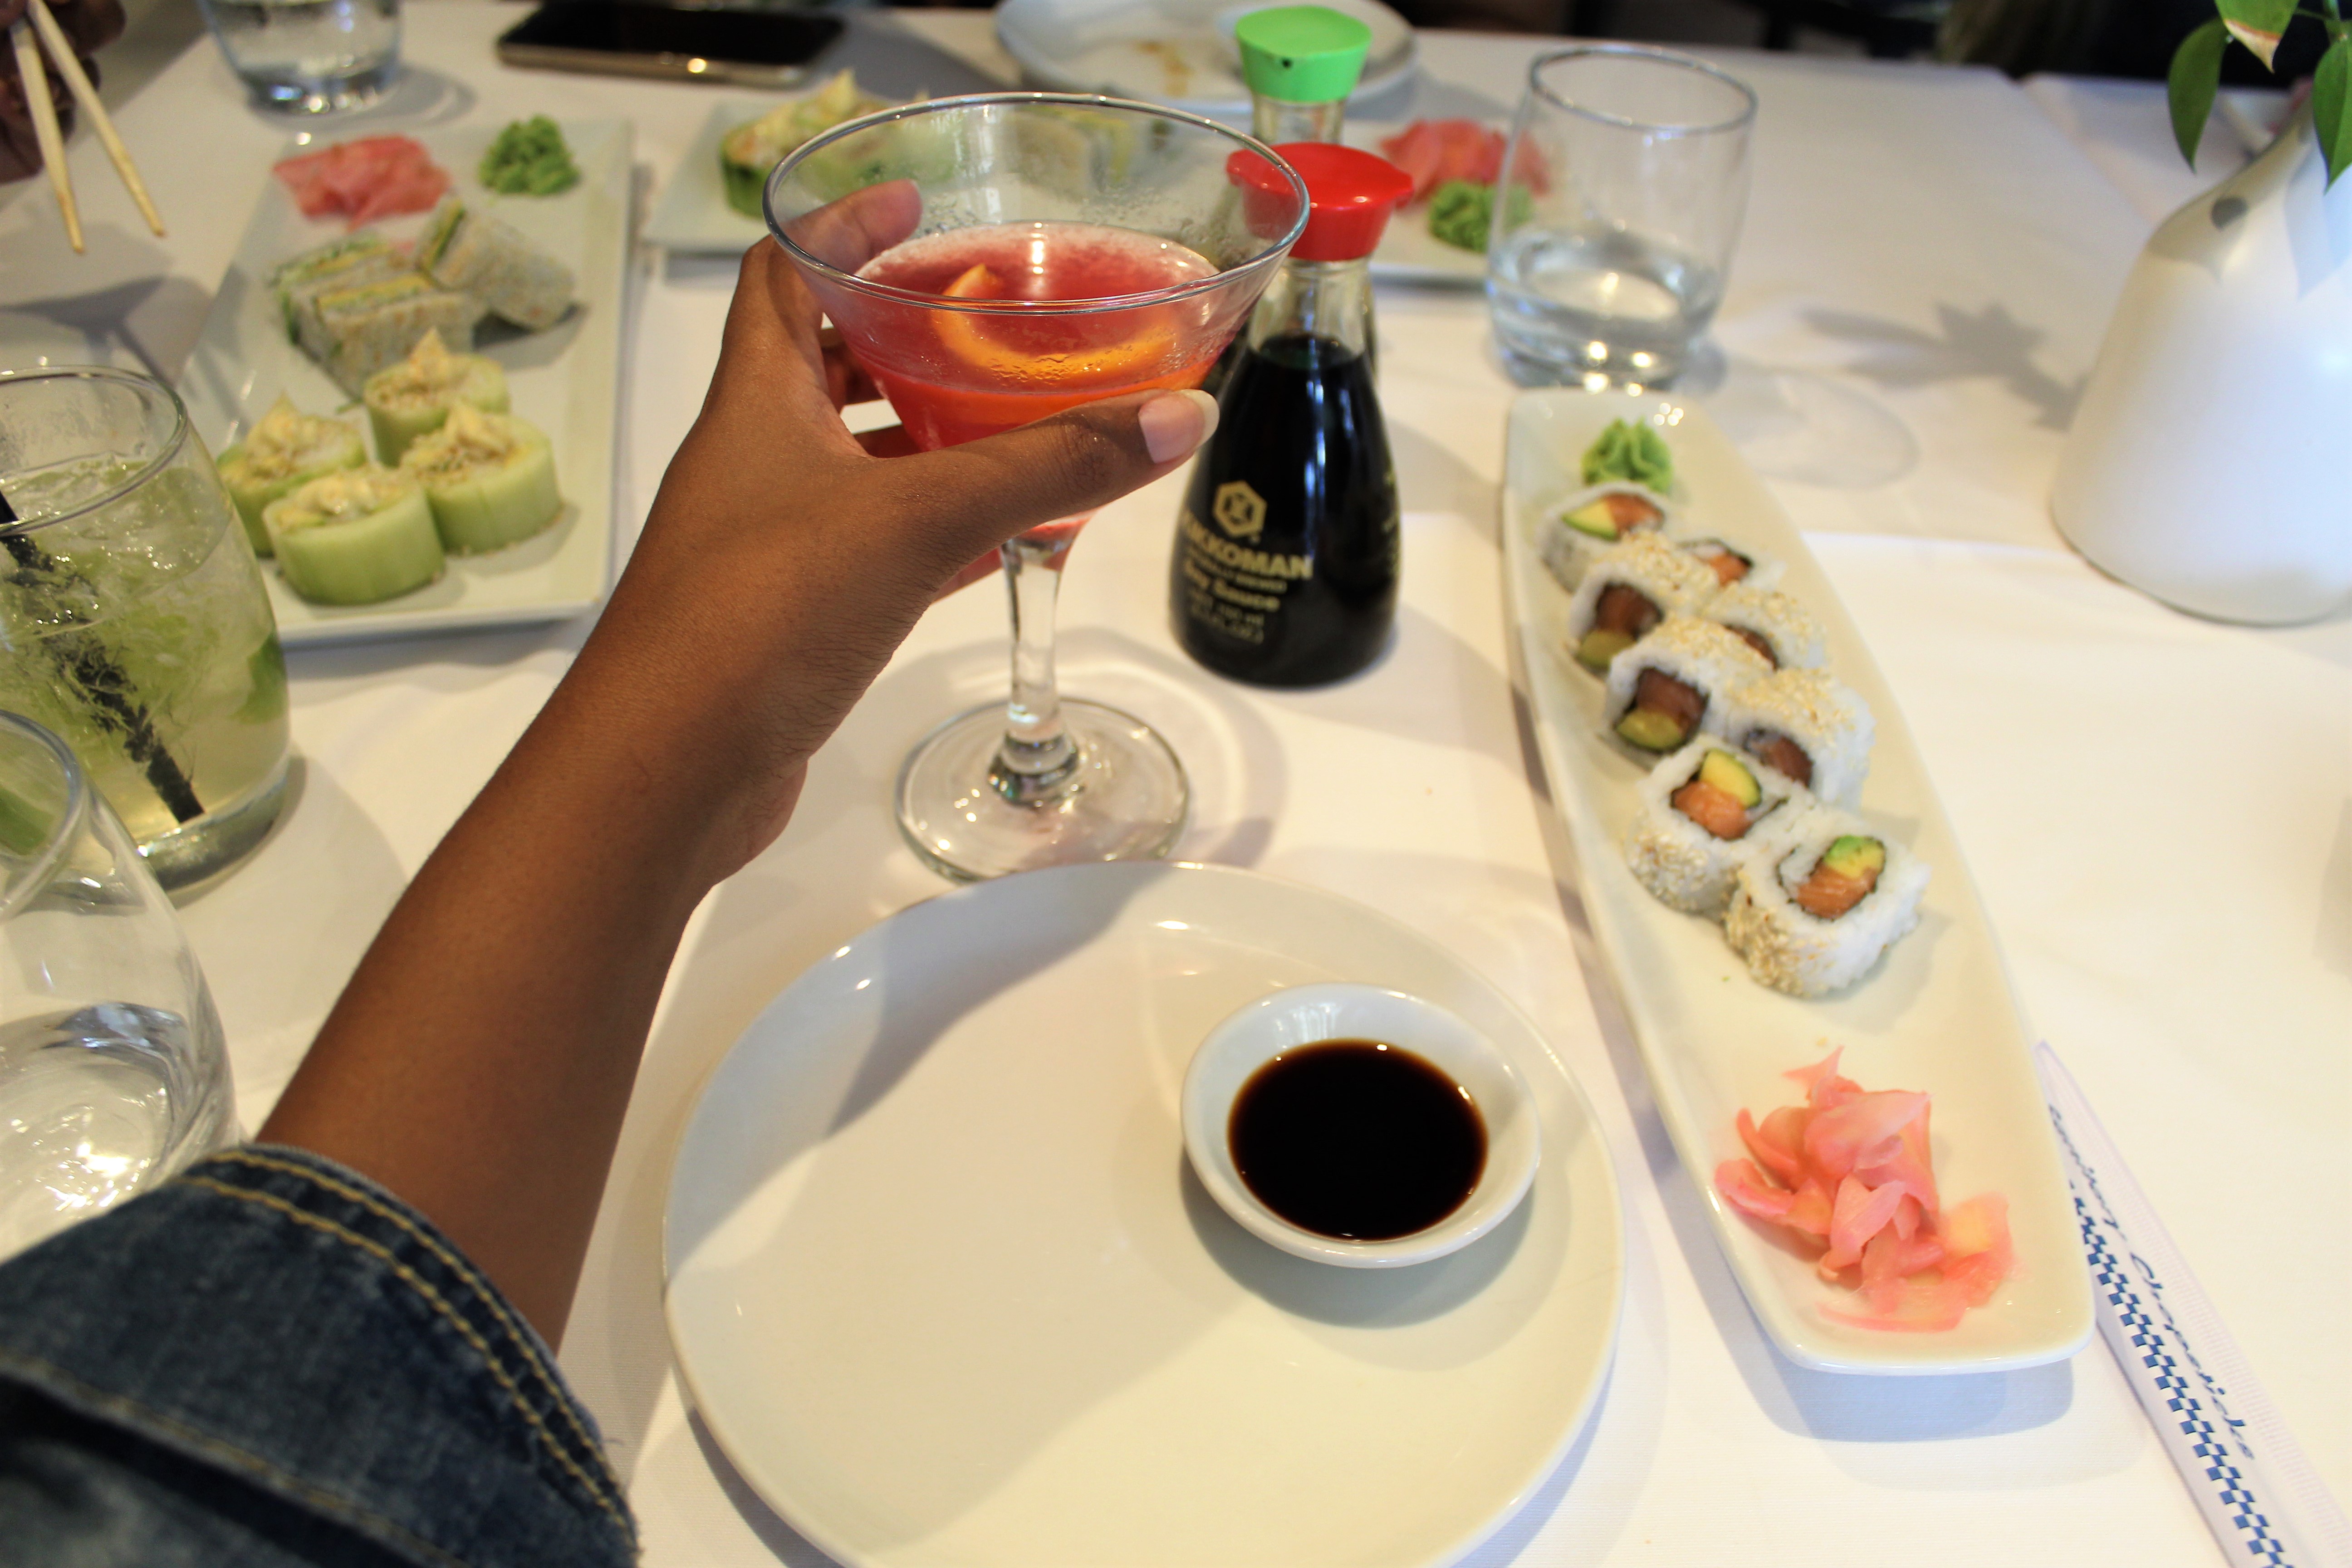 sushi platter with soy sauce and pink cosmopolitan cocktail